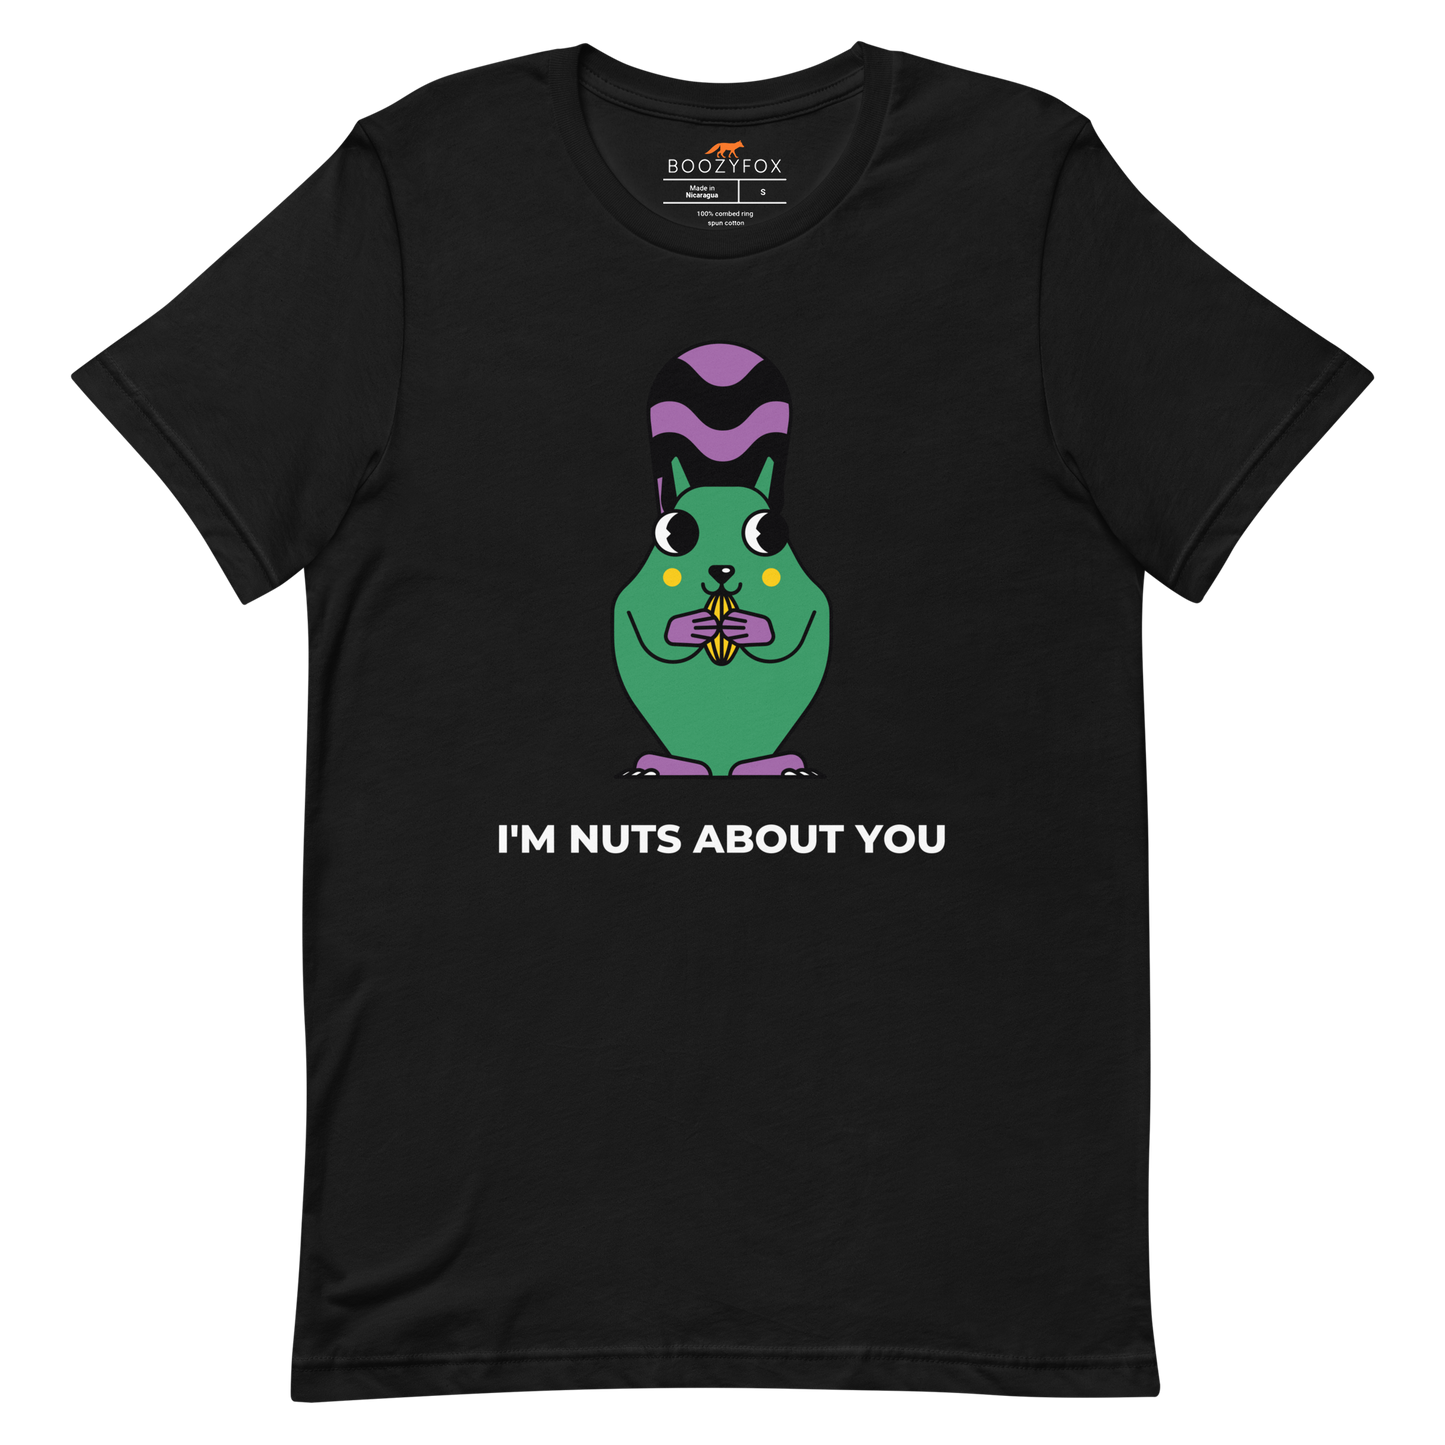 Black Premium Squirrel T-Shirt featuring an I'm Nuts About You graphic on the chest - Funny Graphic Squirrel Tees - Boozy Fox